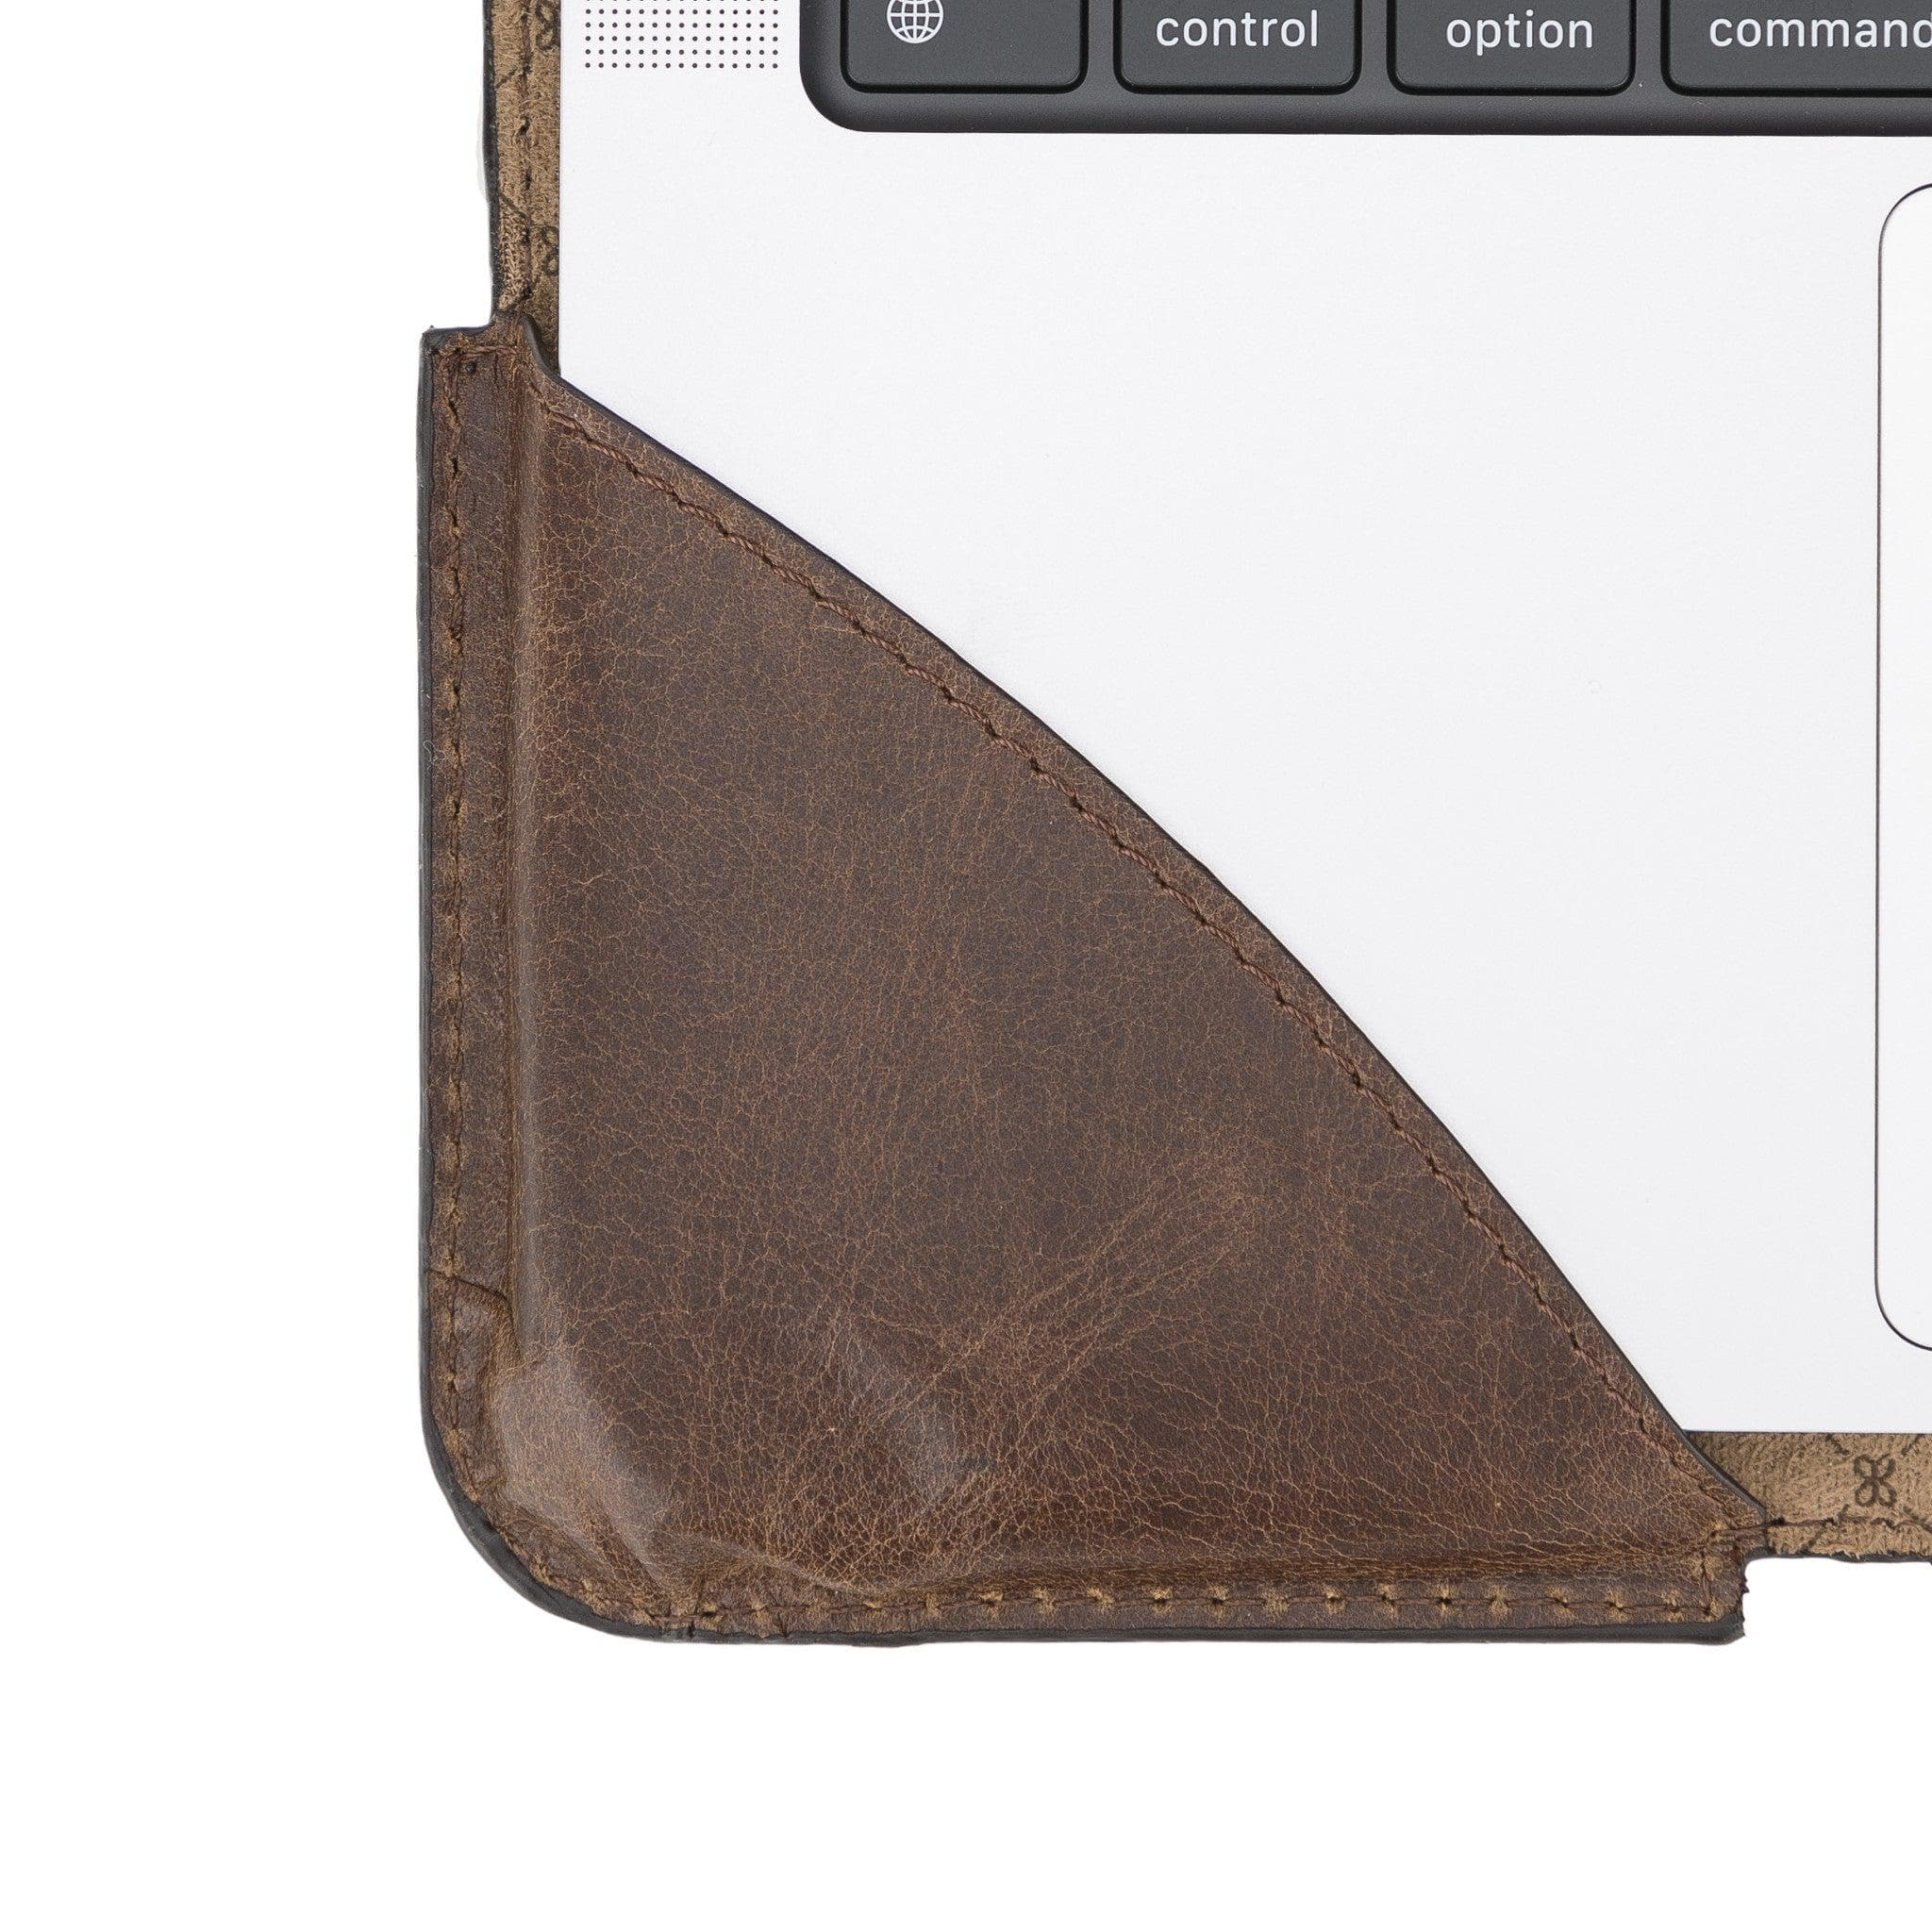 Chester Leather Sleeve for 13.3" to 16.2" Apple MacBook/Laptops Bouletta